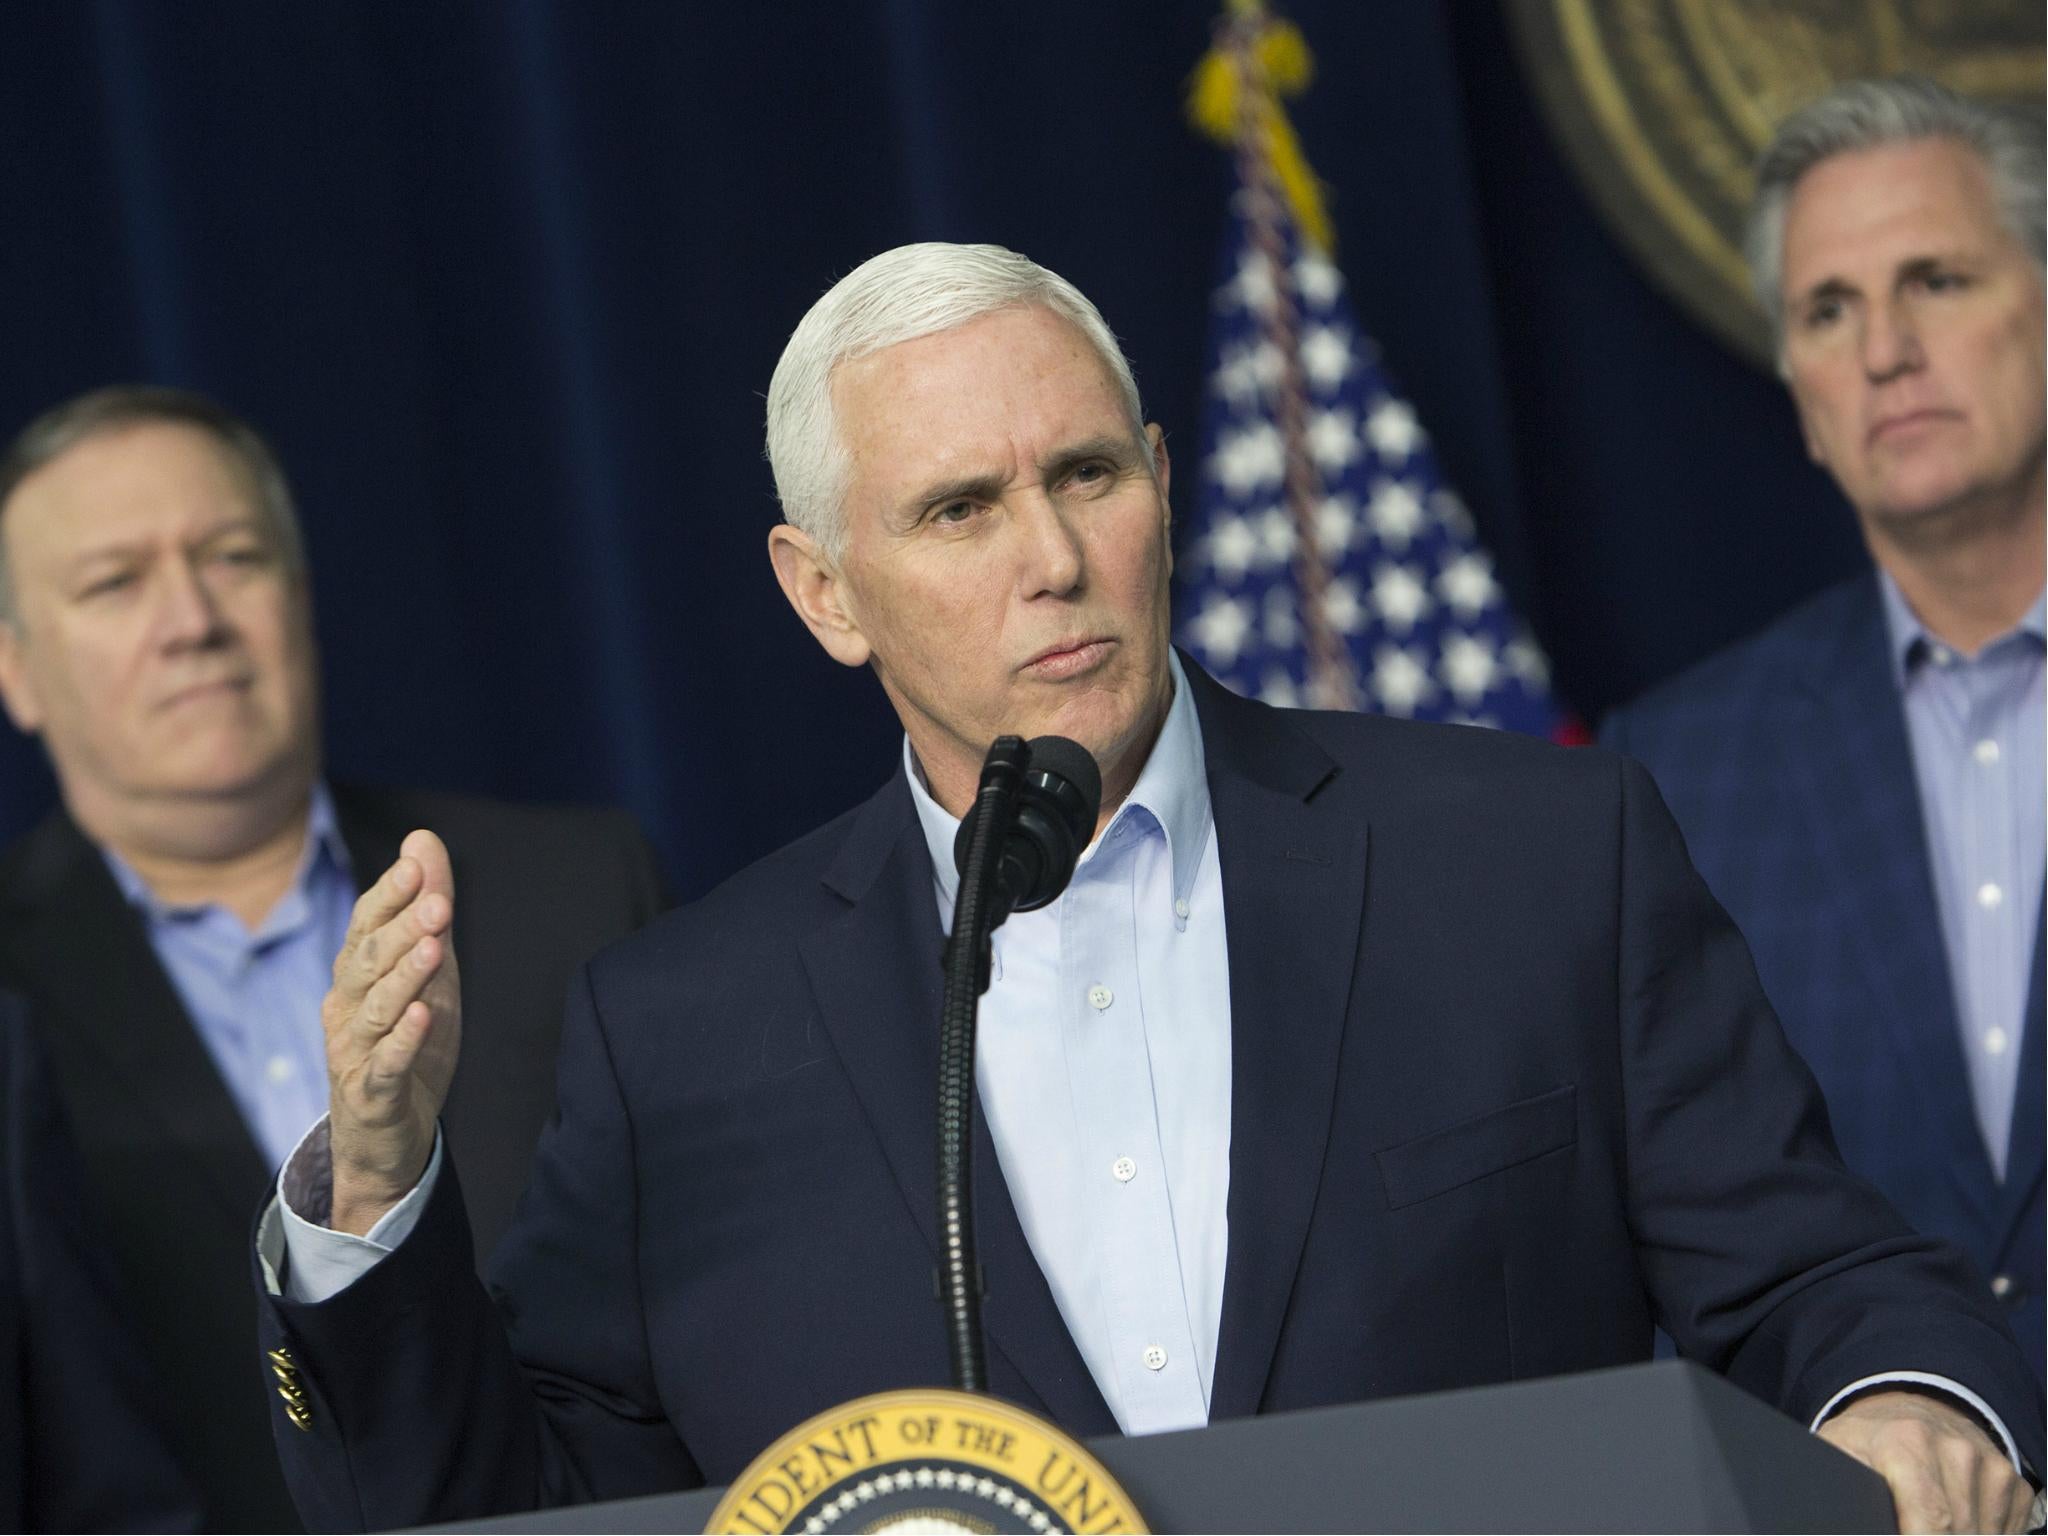 Mike Pence has damaged relations with the Middle East even further